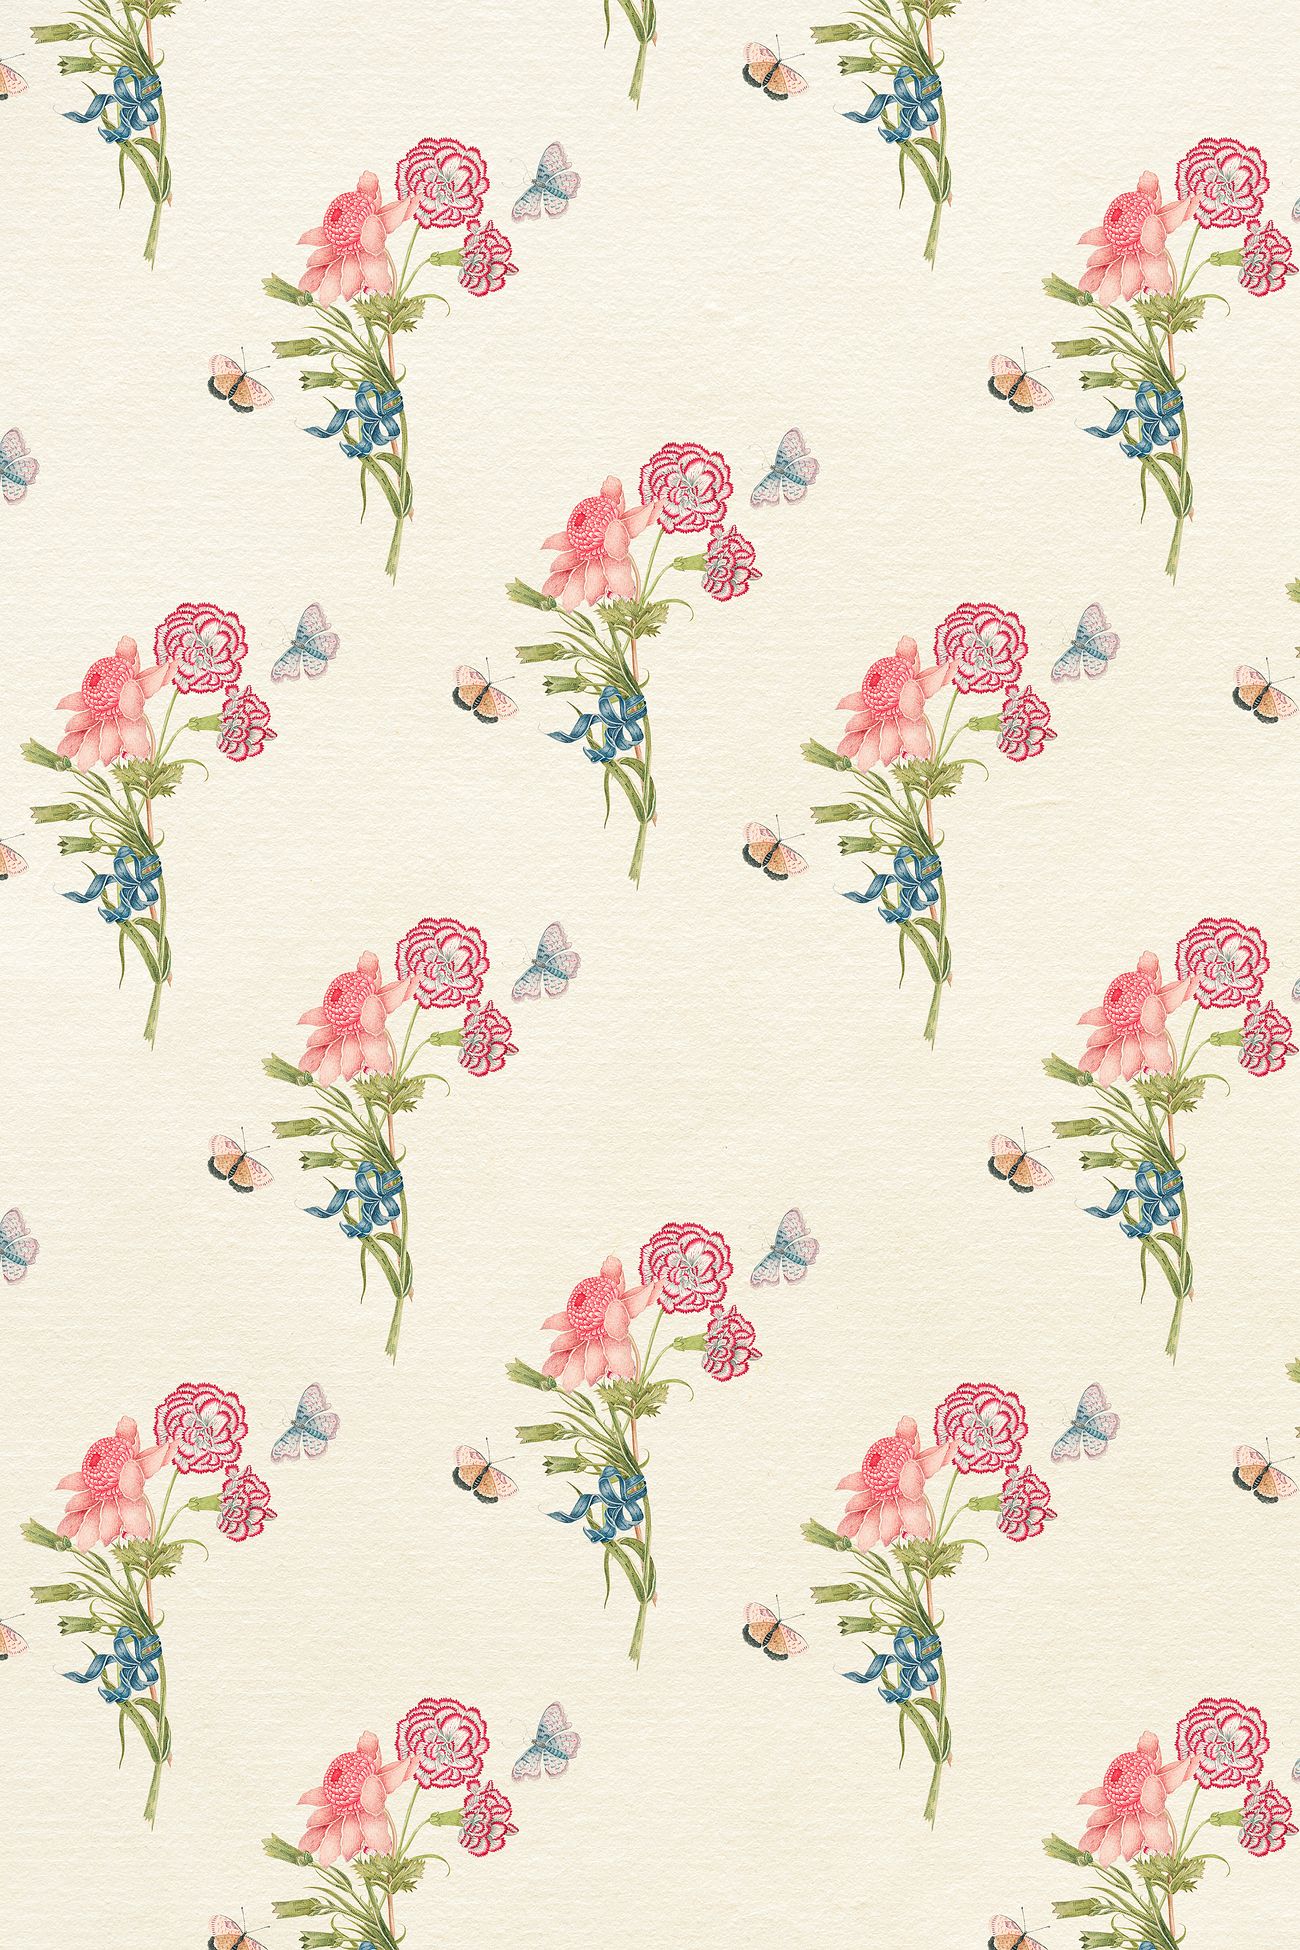 18th Century Pattern Images | Free Vectors, PNGs, Mockups & Backgrounds ...